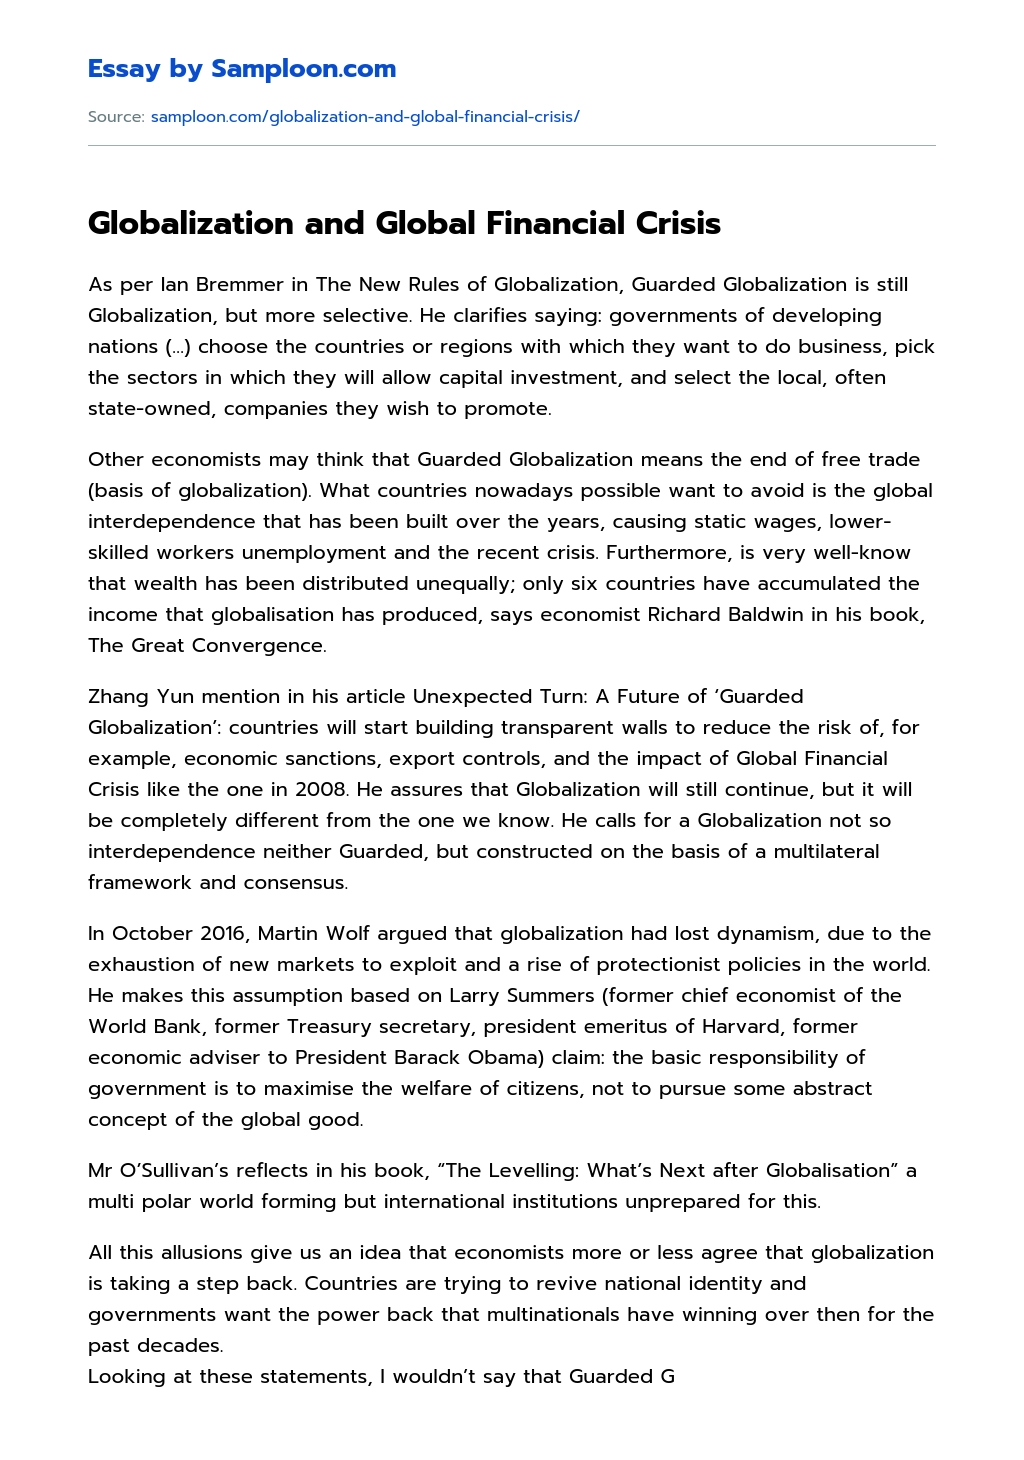 Globalization and Global Financial Crisis essay